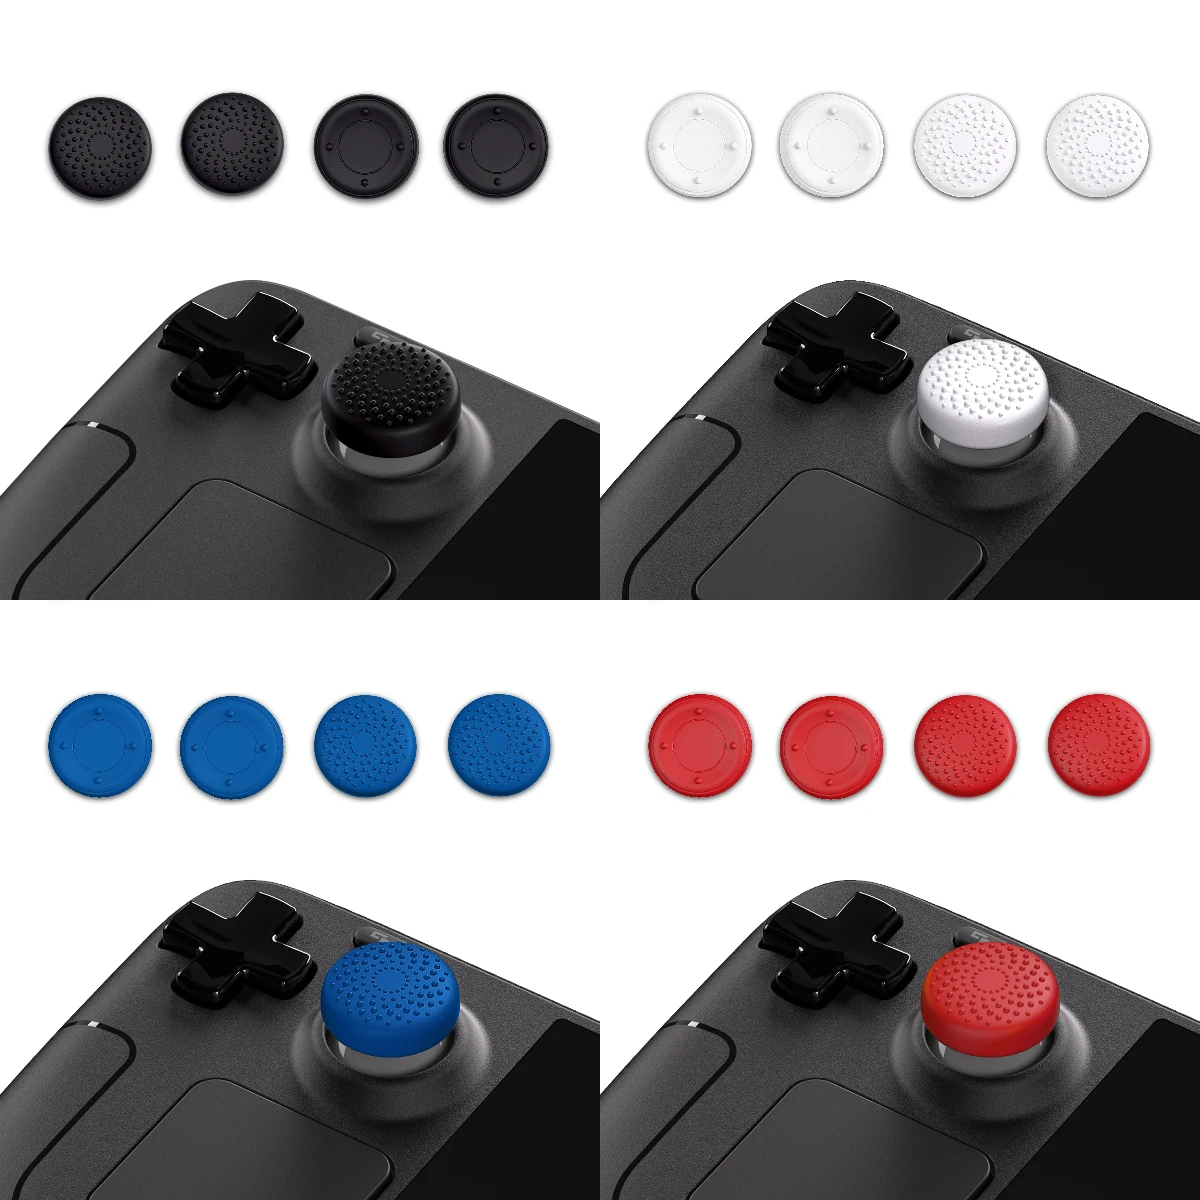 

PlayVital 4pcs Thumb Grip Caps Silicone Thumbsticks Grips Joystick Caps for Steam Deck LCD & OLED - Raised Dots & Studded Design